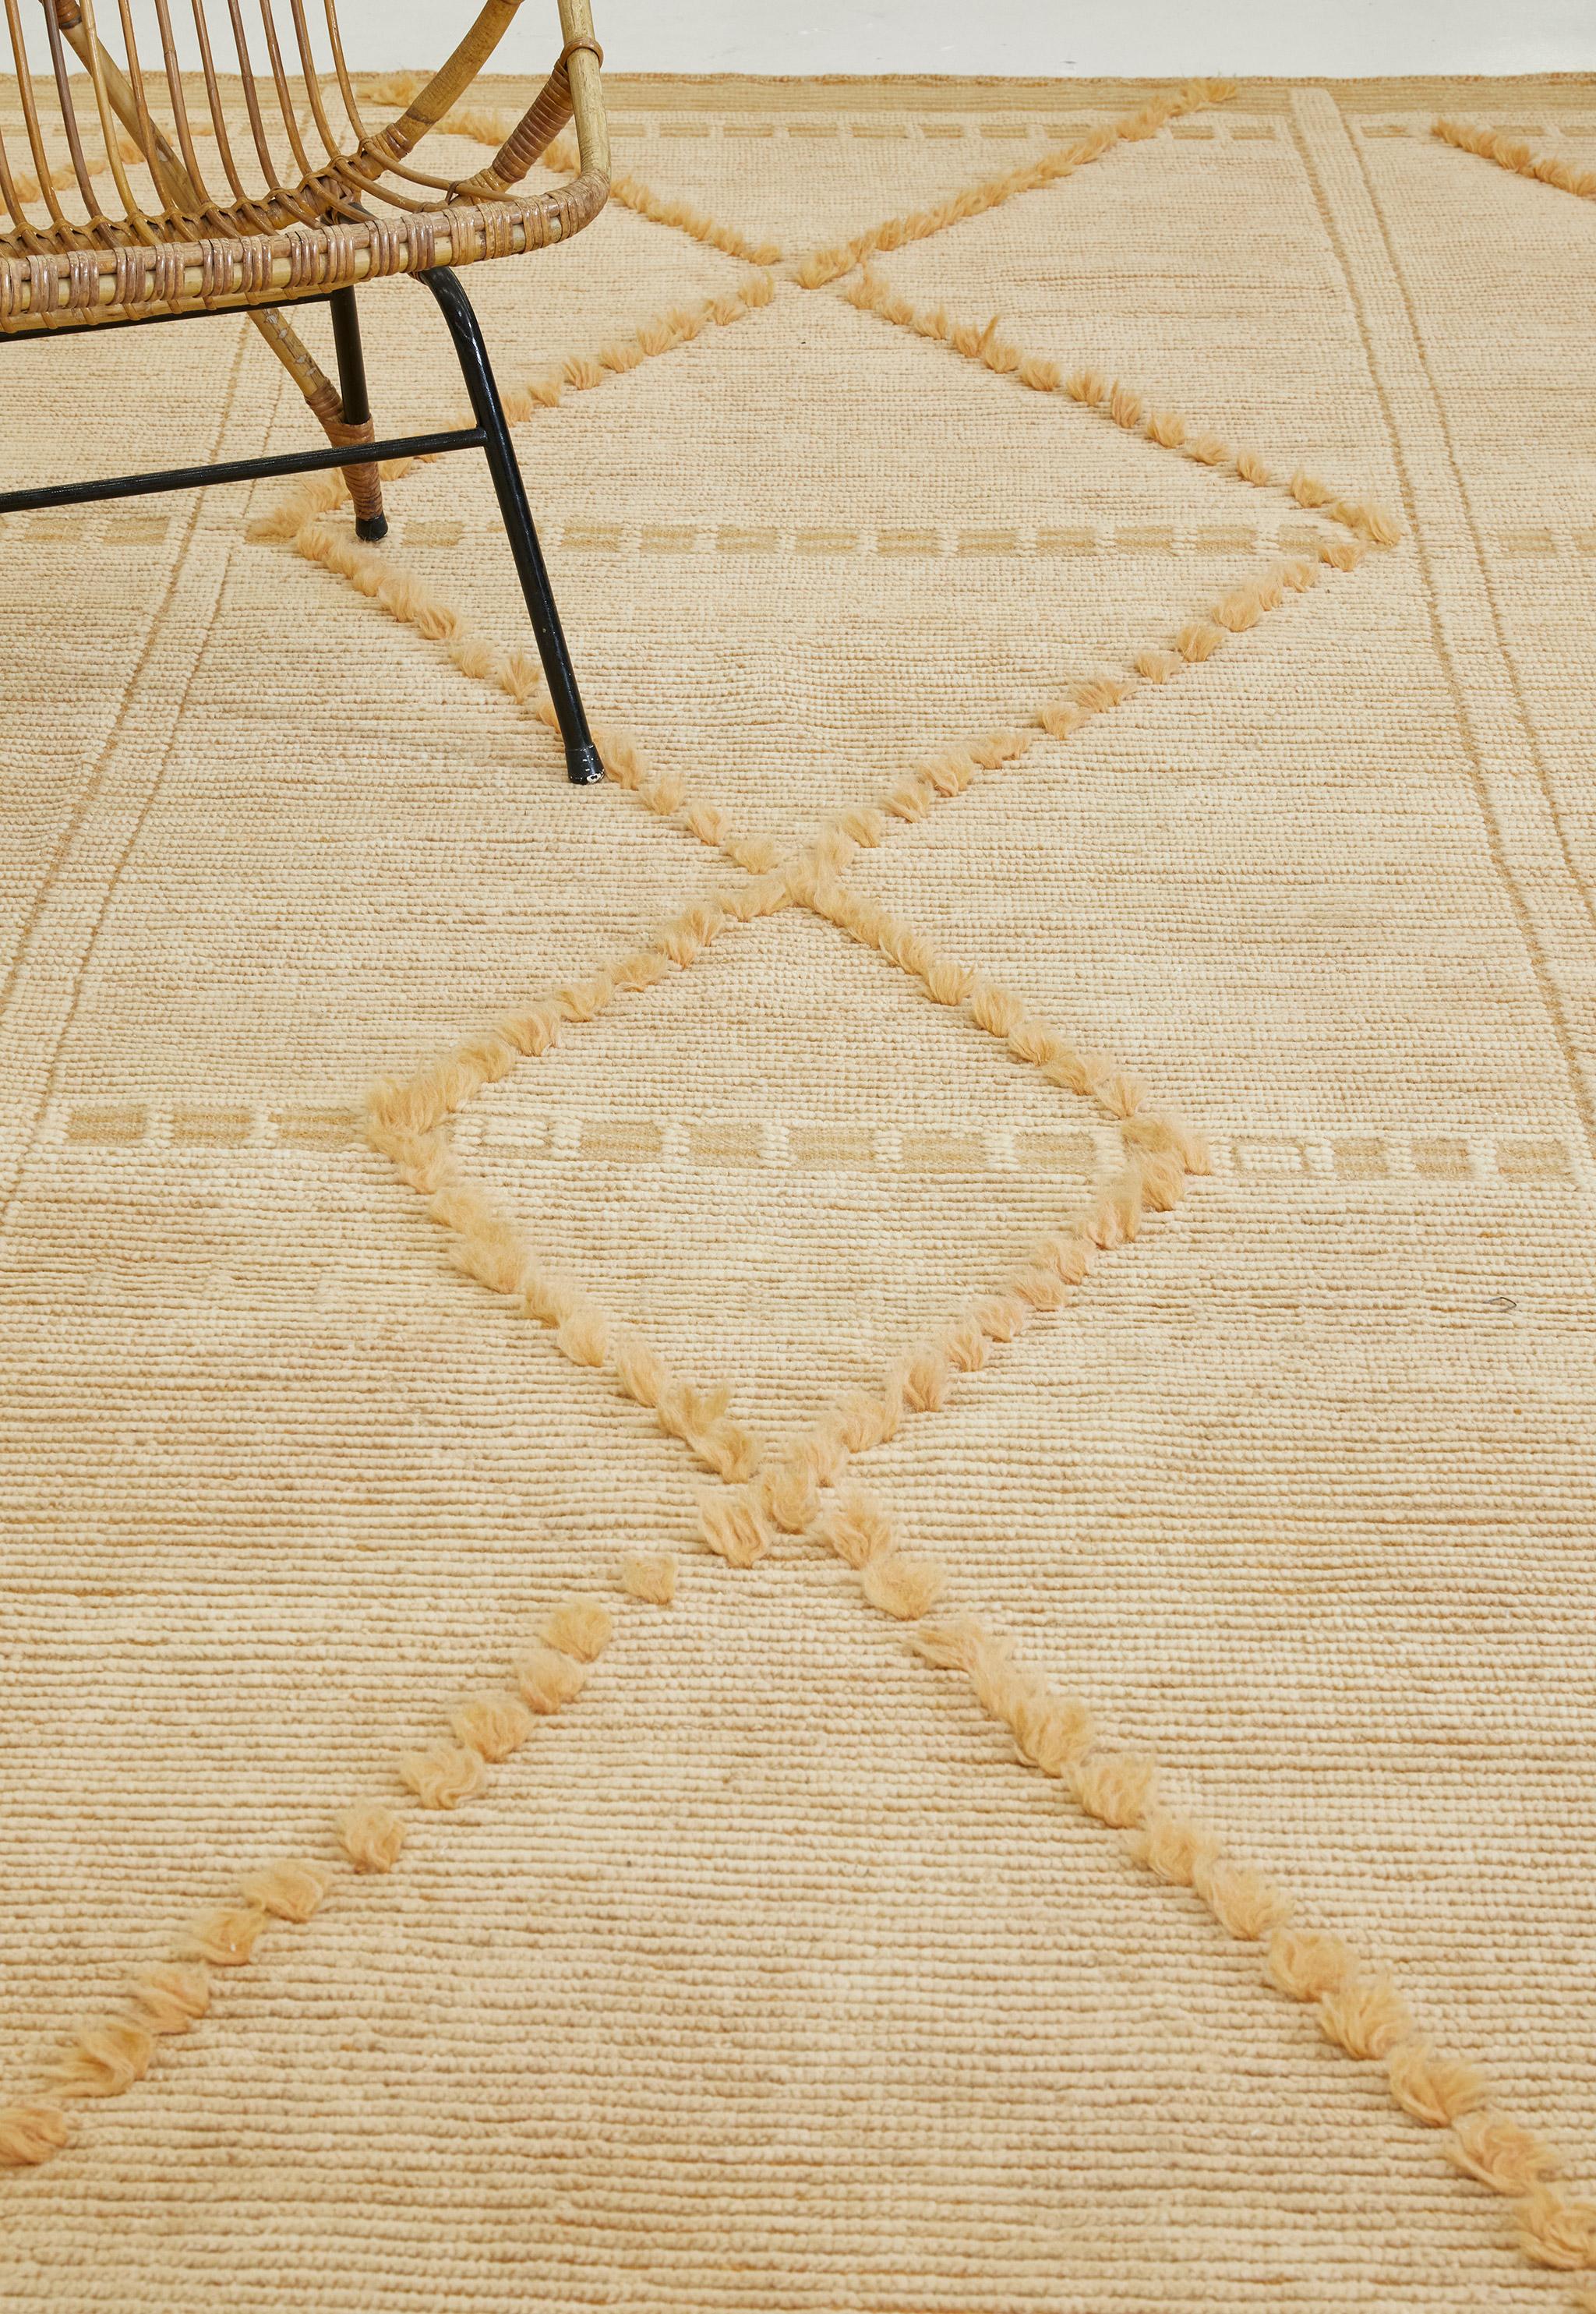 A Moroccan inspired design with formal resolve. Sangiovese's trim pile hosts a classic diamond trellis motif. Contrasting flatweave accents ground the composition.

Here in sunny apricot.

The Estancia Collection by Mehraban is a group of casually